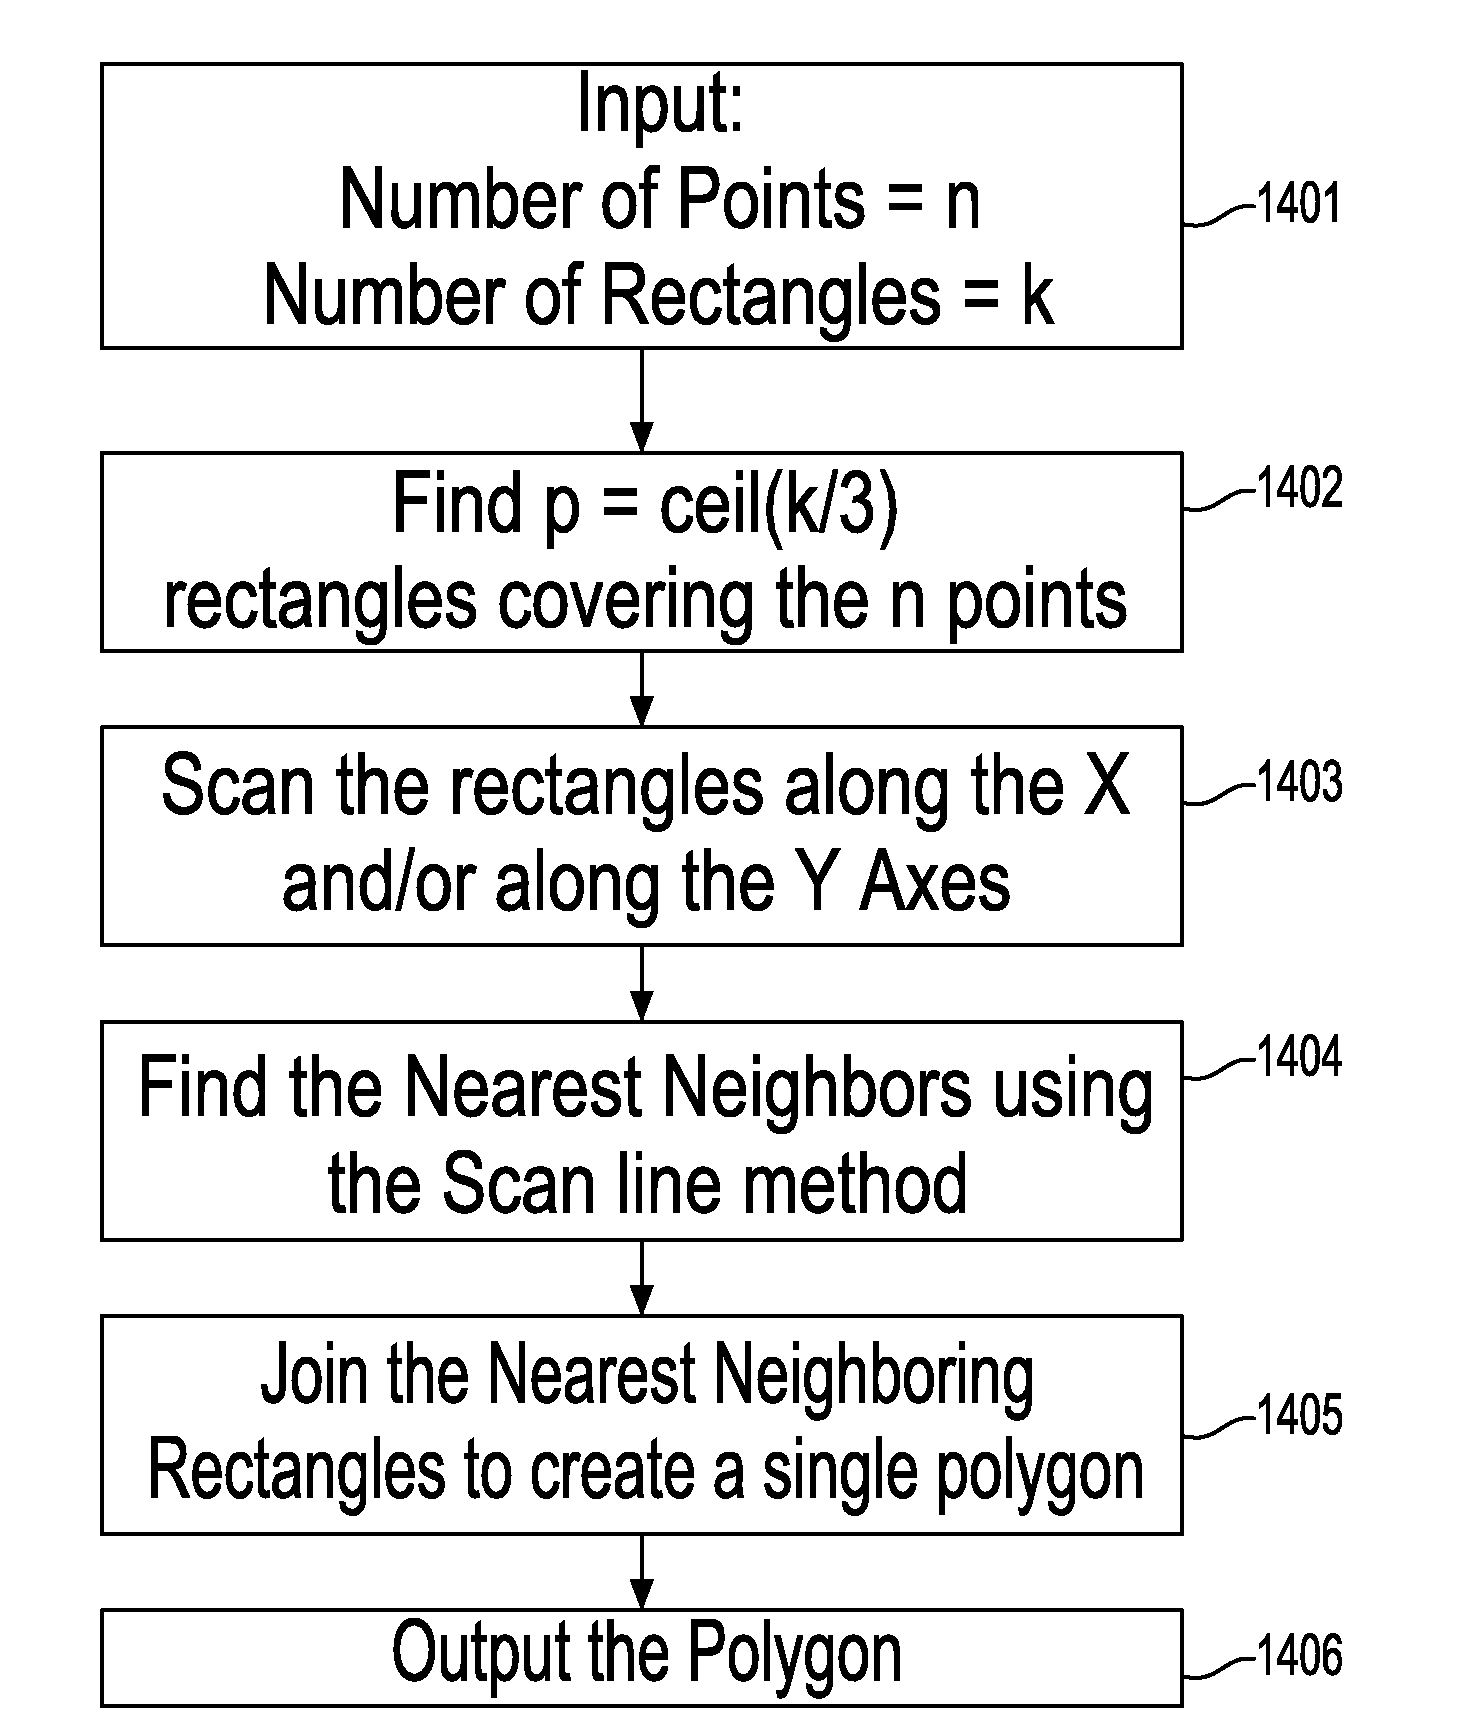 Rectilinear covering method with bounded number of rectangles for designing a VLSI chip